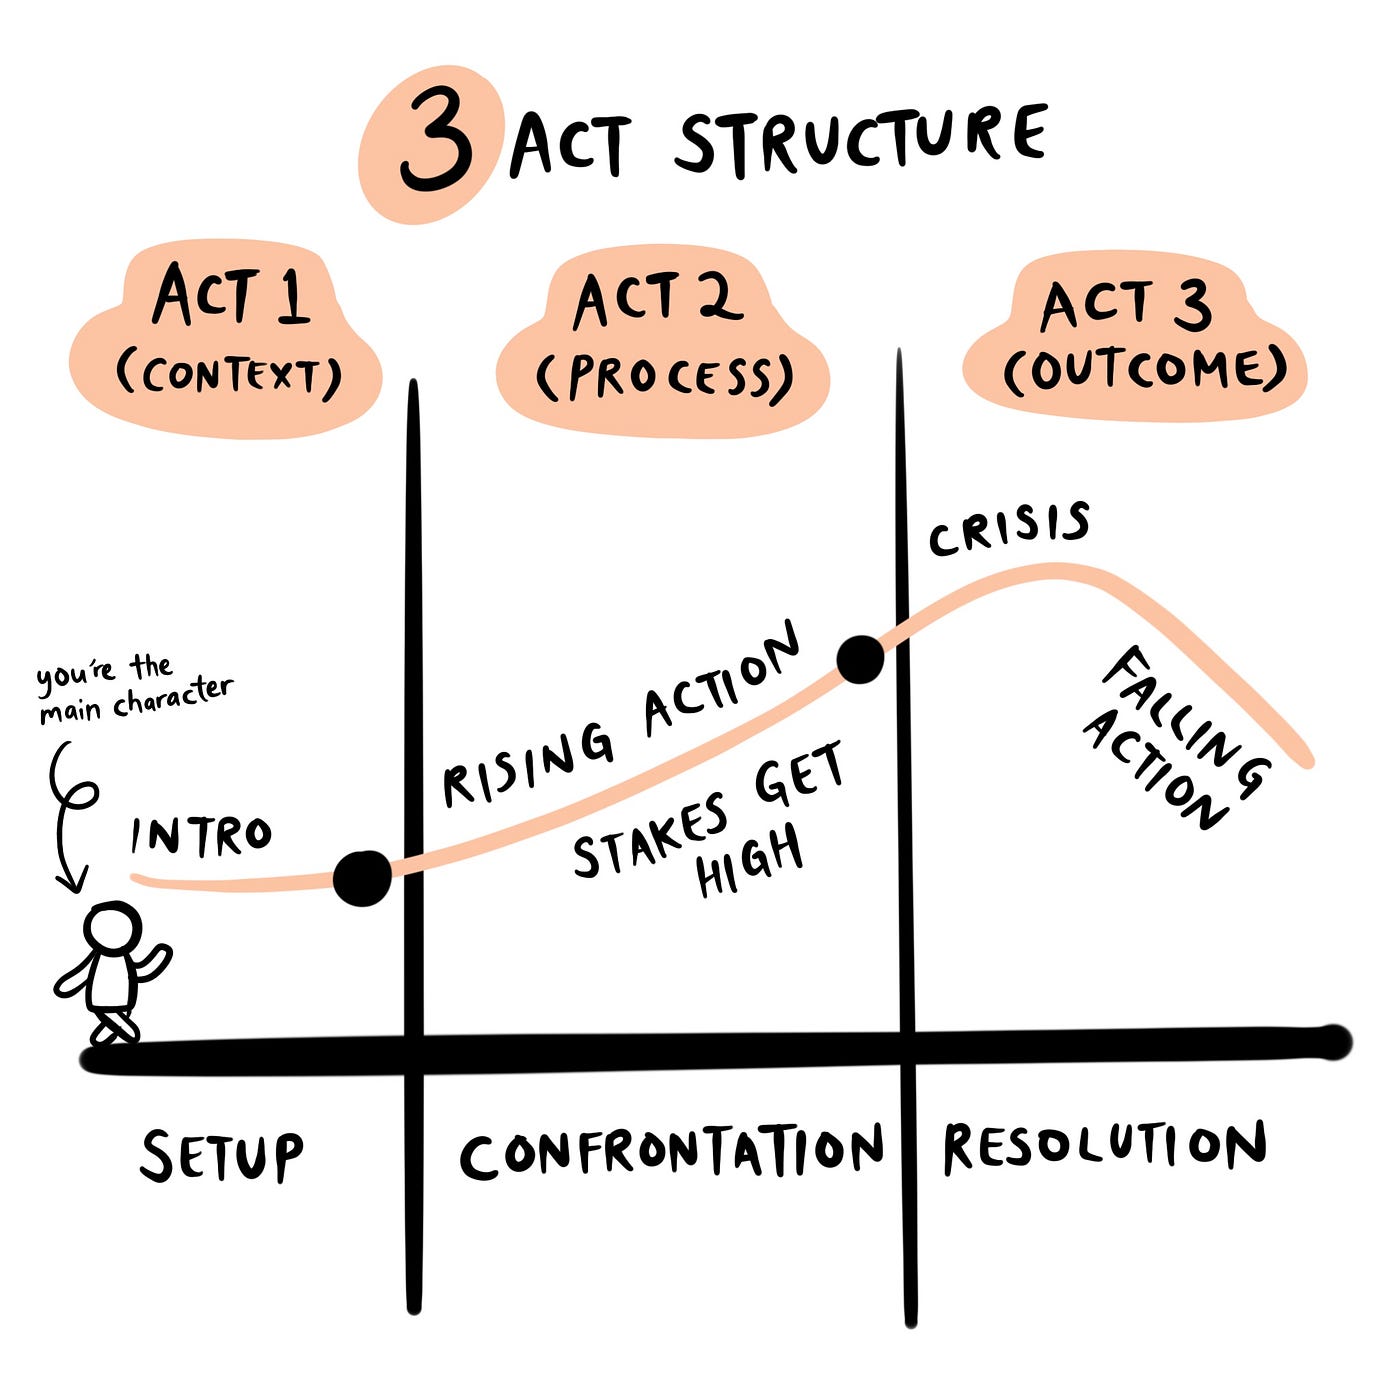 A diagram showing the 3 act structure — Setup, confrontation and resolution